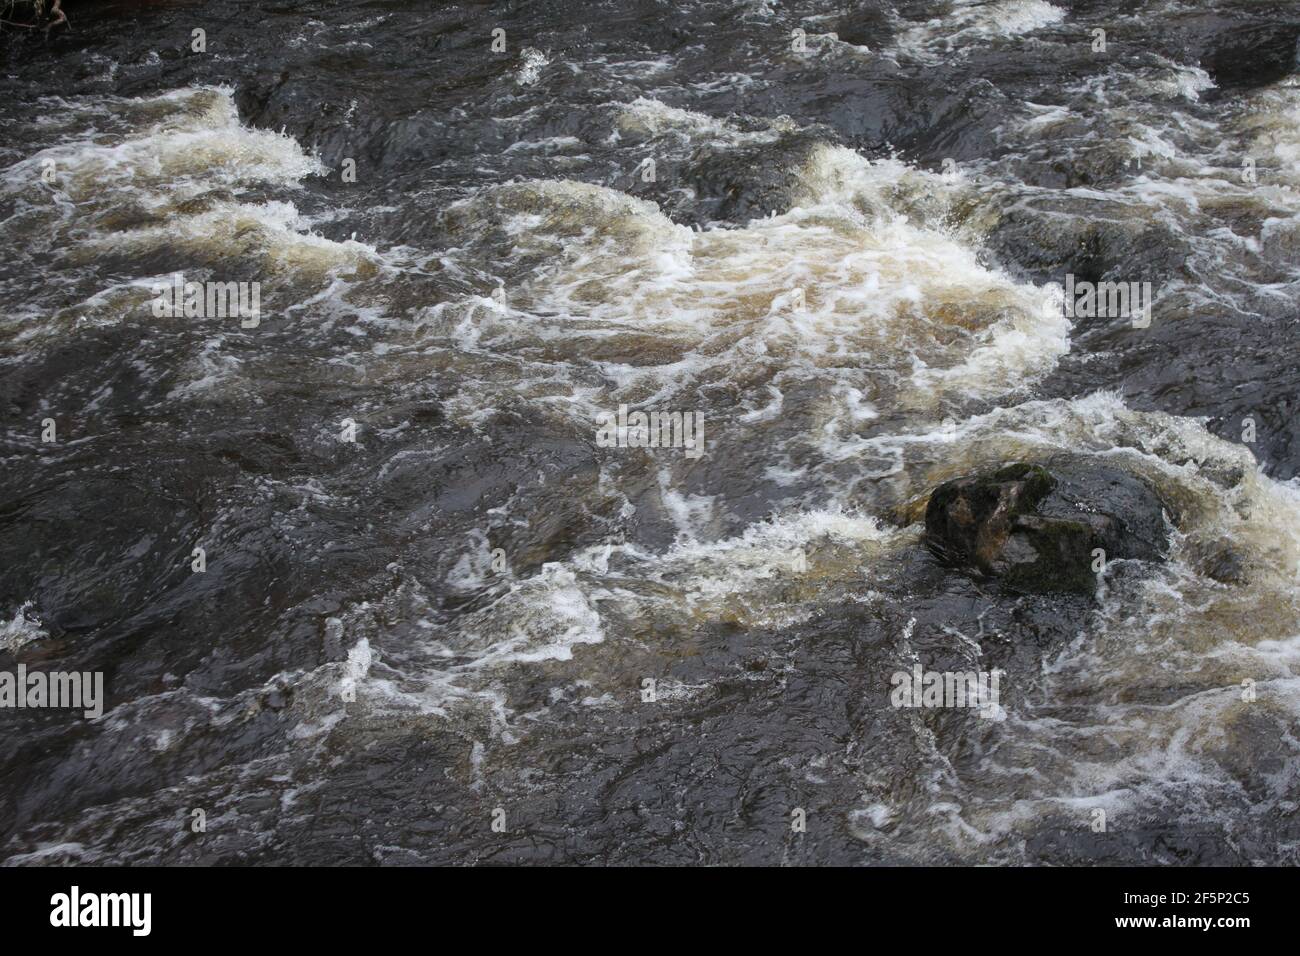 Rivers in the United Kingdom. Tributaries and streams, angry water. Danger in the water. Stock Photo